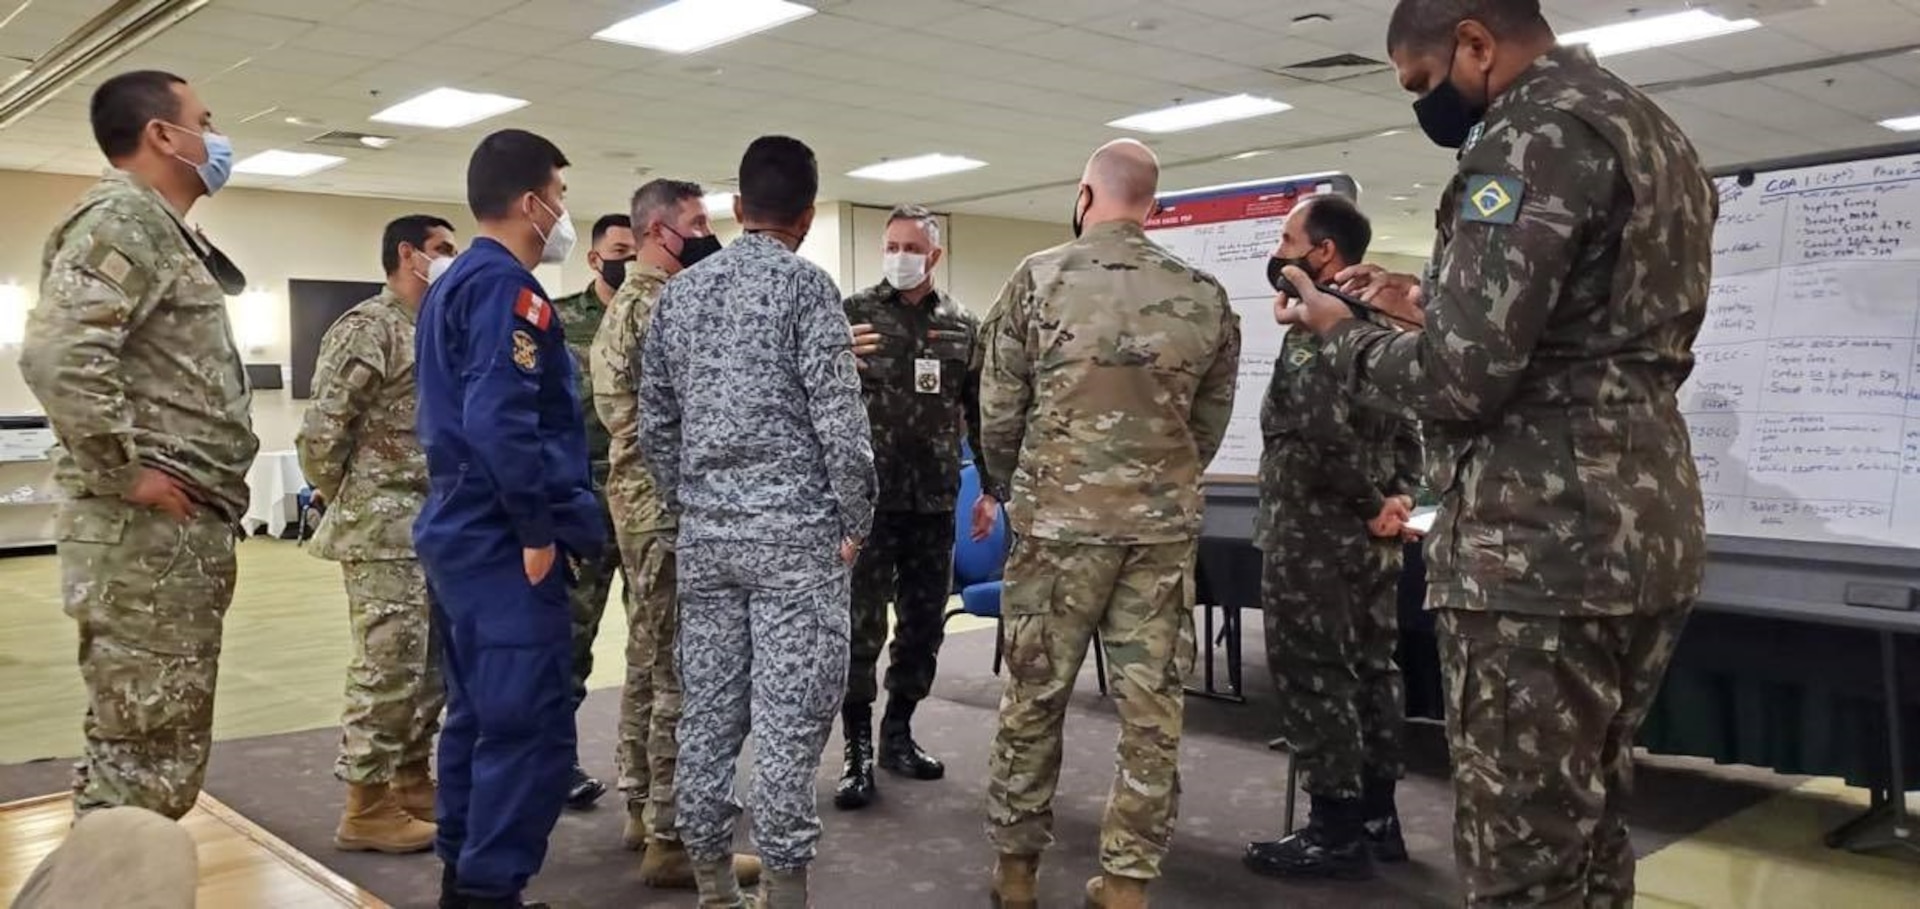 Military officers from Brazil, Colombia and Peru conduct mission analysis as part of the Planning in Crisis exercise Oct. 28 hosted by U.S. Army South and held at Joint Base San Antonio-Fort Sam Houston Oct. 26-30. The exercise allowed partner nations from the Western Hemisphere to plan and develop an operation order with component commands in preparation for the U.S. Southern Command PANAMAX exercise.